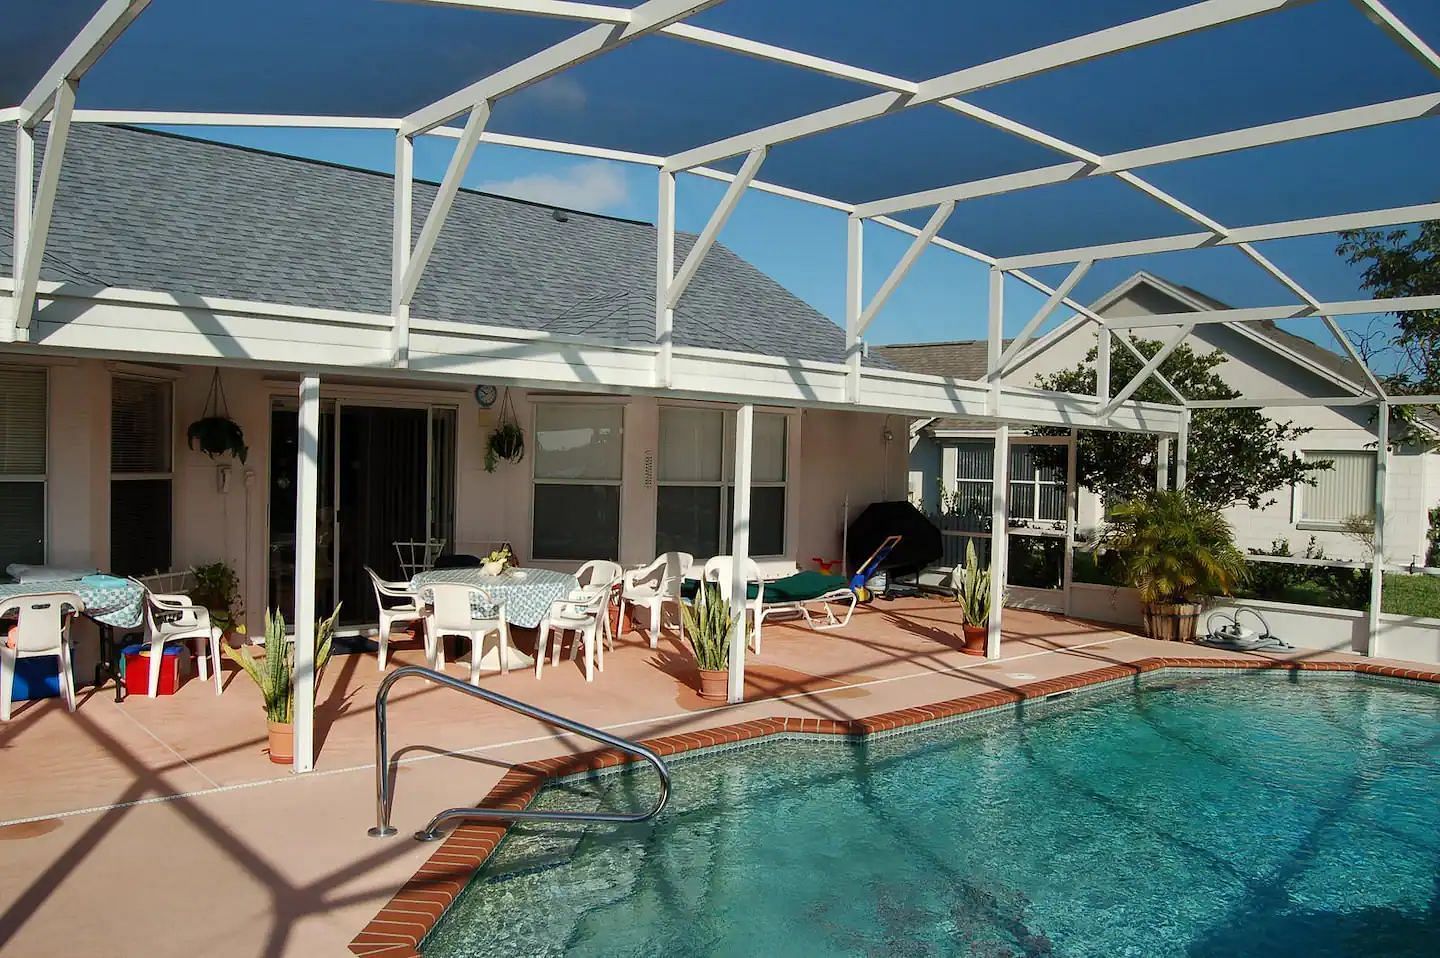 JWguest House at Orlando, Florida | Private Home with Pool, 3 Bd 2 Bath, Close to Disney | Jwbnb no brobnb 2